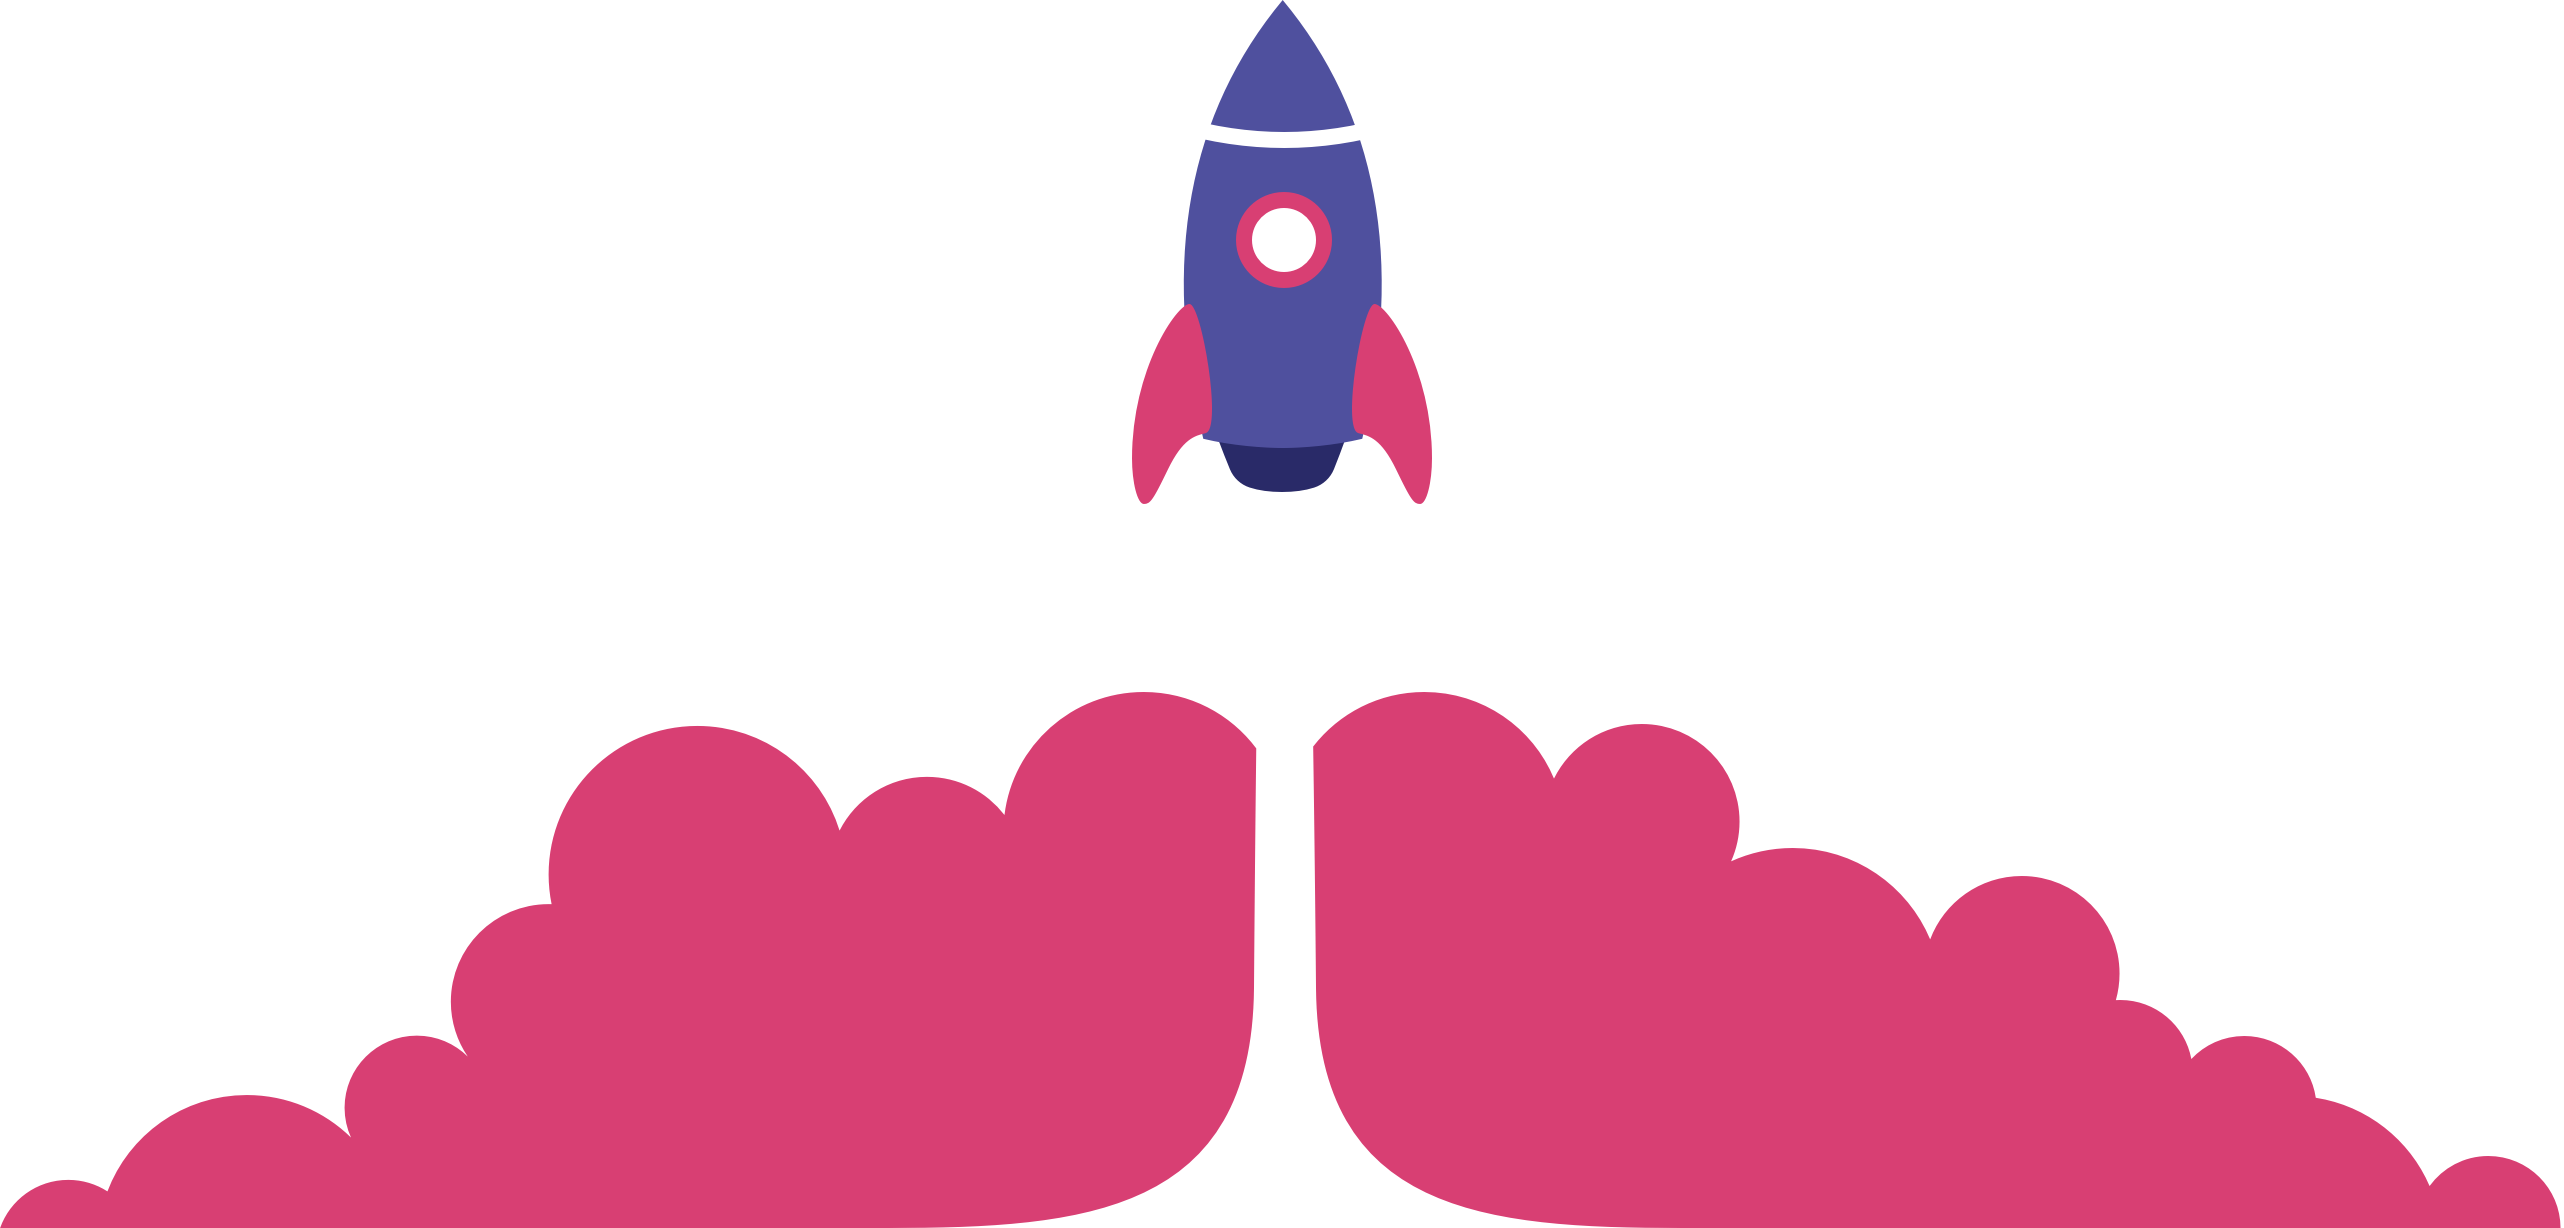 rocket - Reduce risk in your product development with Hypothesis-Driven Design